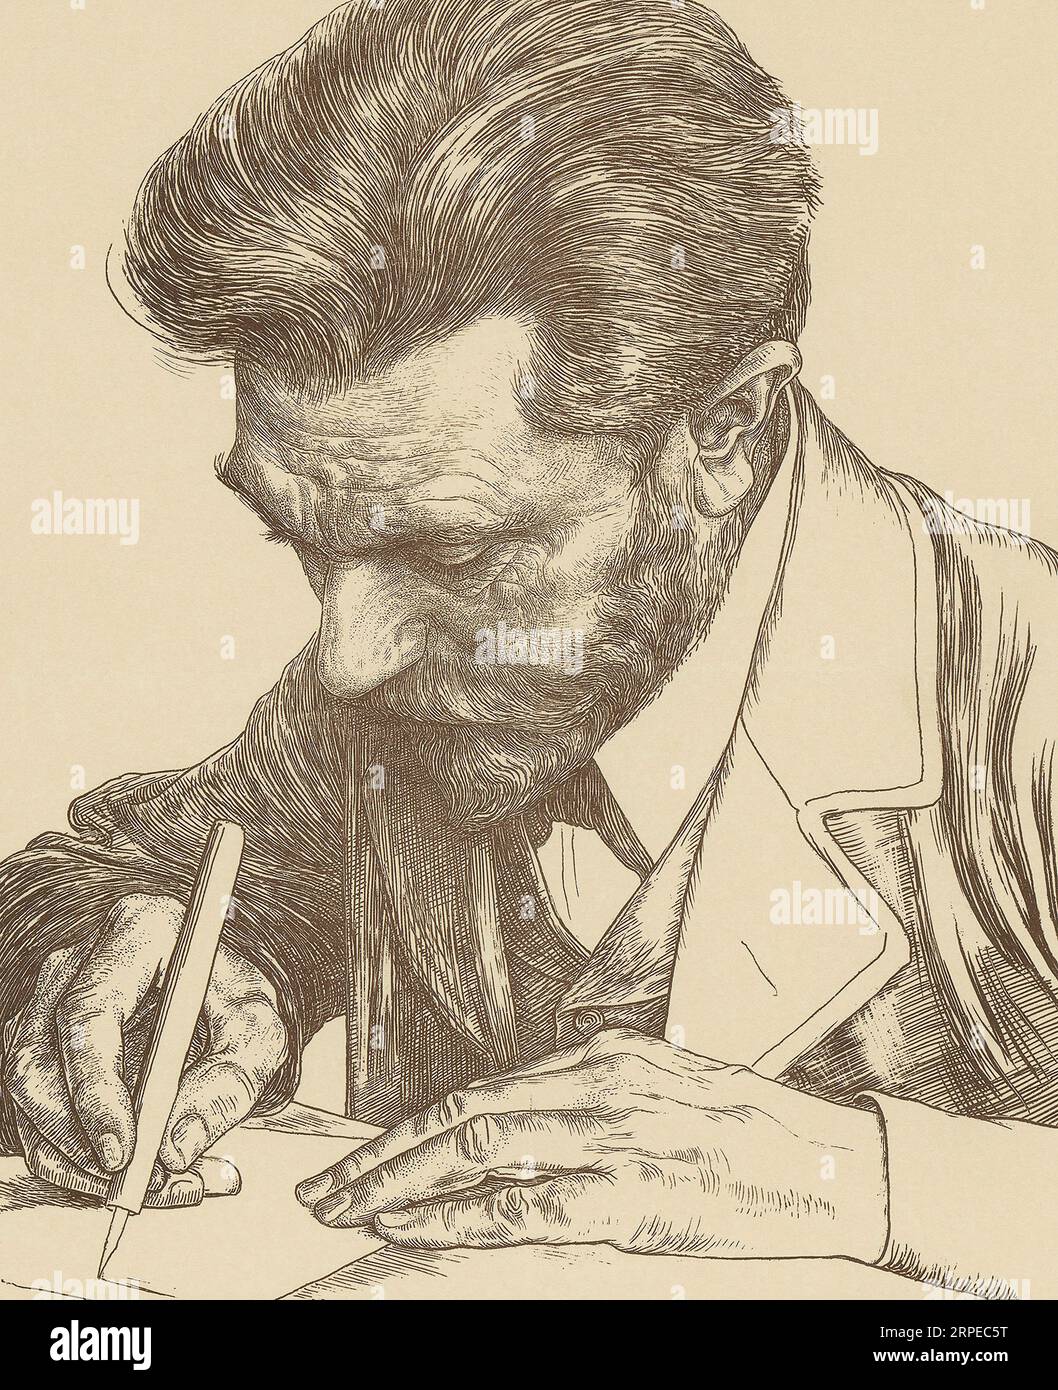 August Bebel, 1840 - 1913.  German socialist politician and political author.  After a work by Jan Veth. Stock Photo